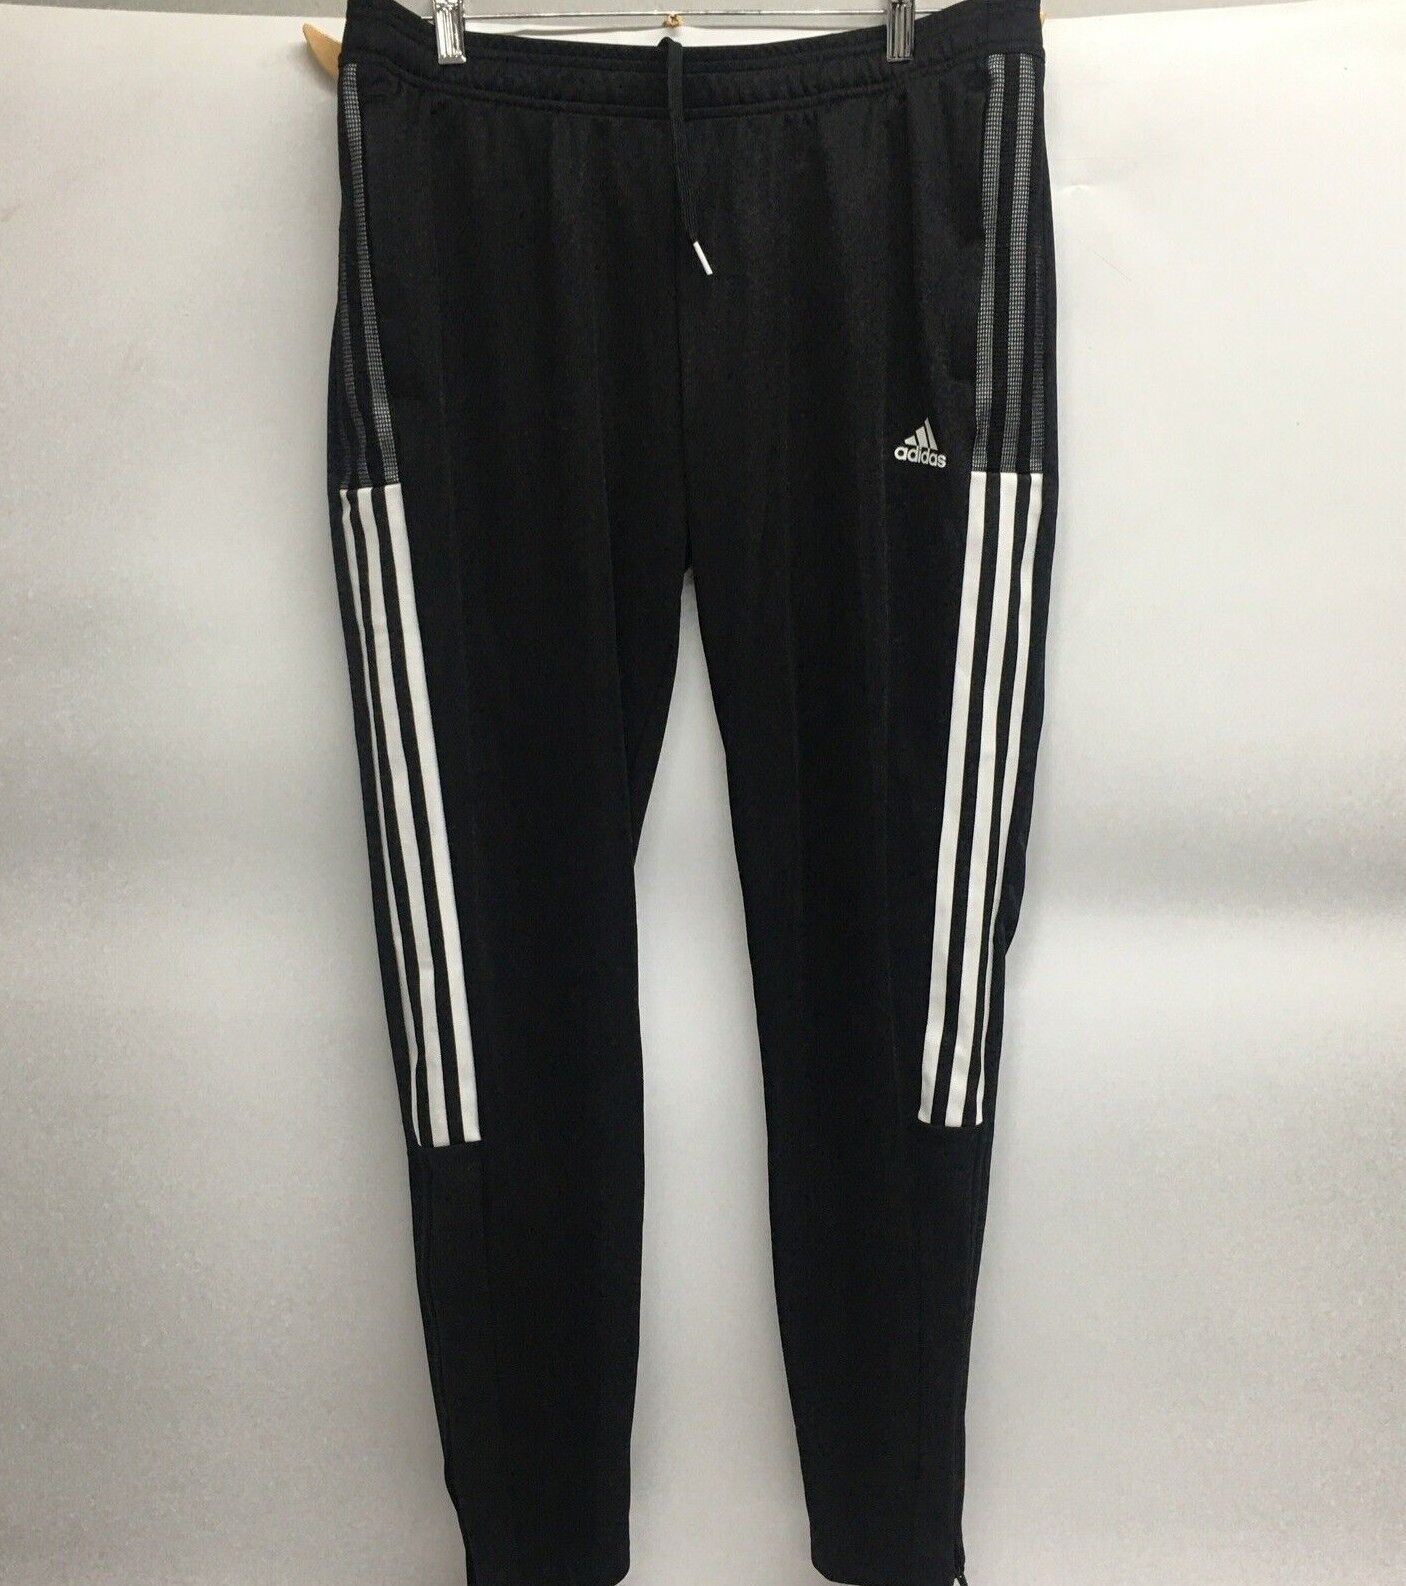 Snadno se to stane 945 Asimilace adidas trousers half Jen to